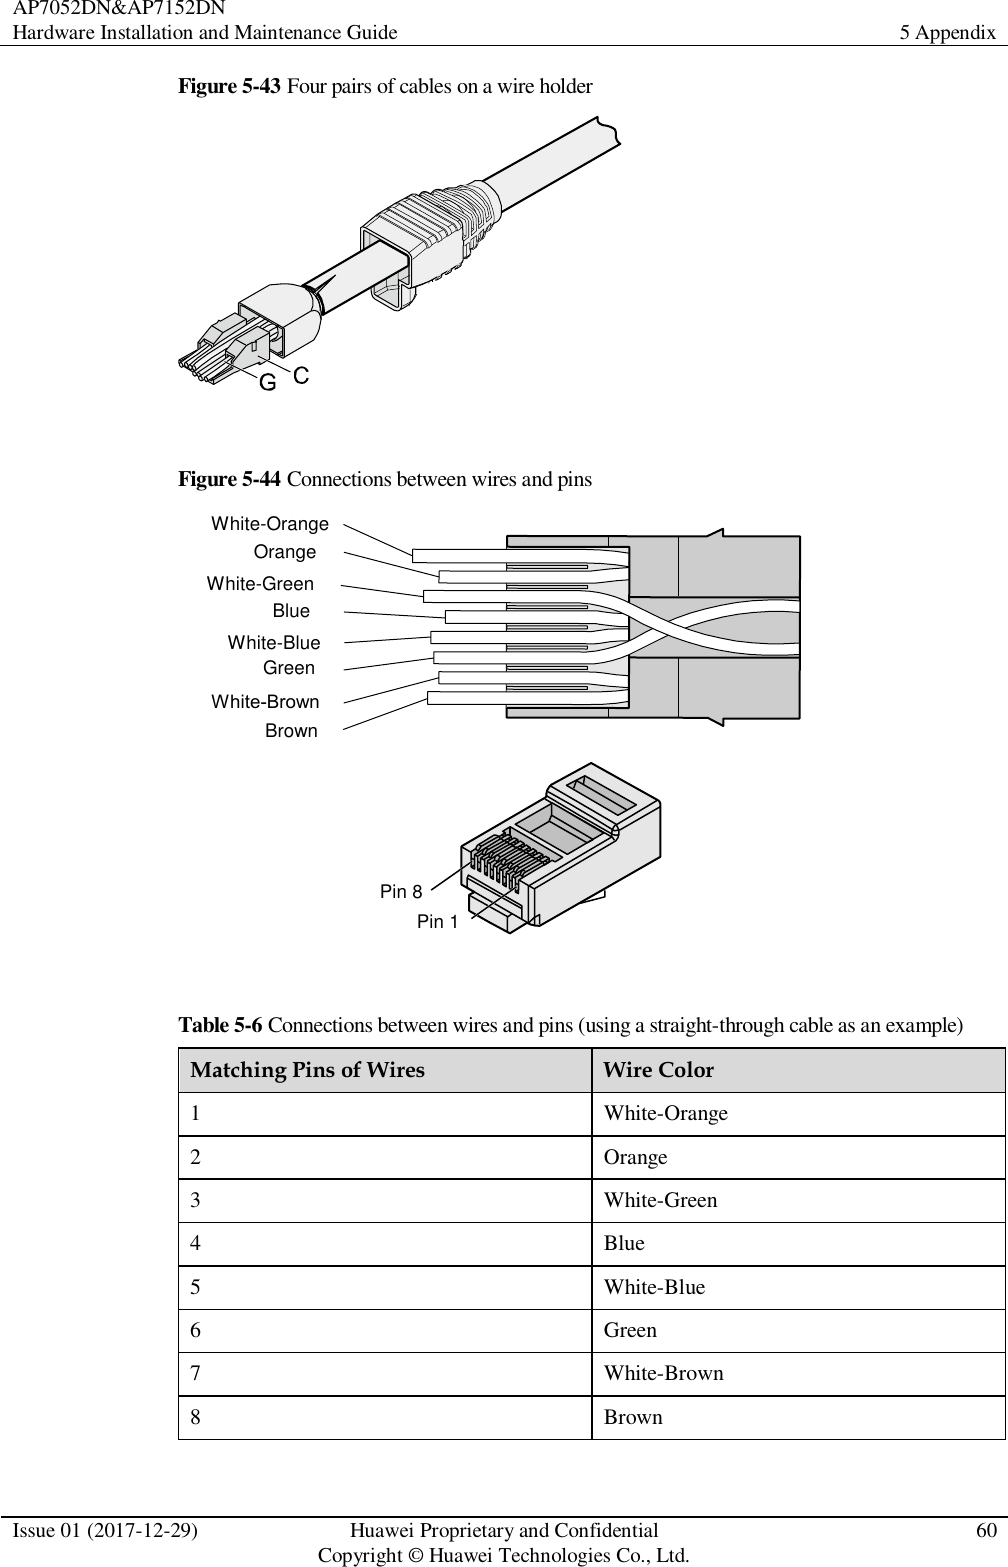 AP7052DN&amp;AP7152DN Hardware Installation and Maintenance Guide 5 Appendix  Issue 01 (2017-12-29) Huawei Proprietary and Confidential                                     Copyright © Huawei Technologies Co., Ltd. 60  Figure 5-43 Four pairs of cables on a wire holder   Figure 5-44 Connections between wires and pins BrownWhite-BrownGreenWhite-BlueBlueWhite-GreenOrangeWhite-OrangePin 8Pin 1  Table 5-6 Connections between wires and pins (using a straight-through cable as an example) Matching Pins of Wires Wire Color 1 White-Orange 2 Orange 3 White-Green 4 Blue 5 White-Blue 6 Green 7 White-Brown 8 Brown 